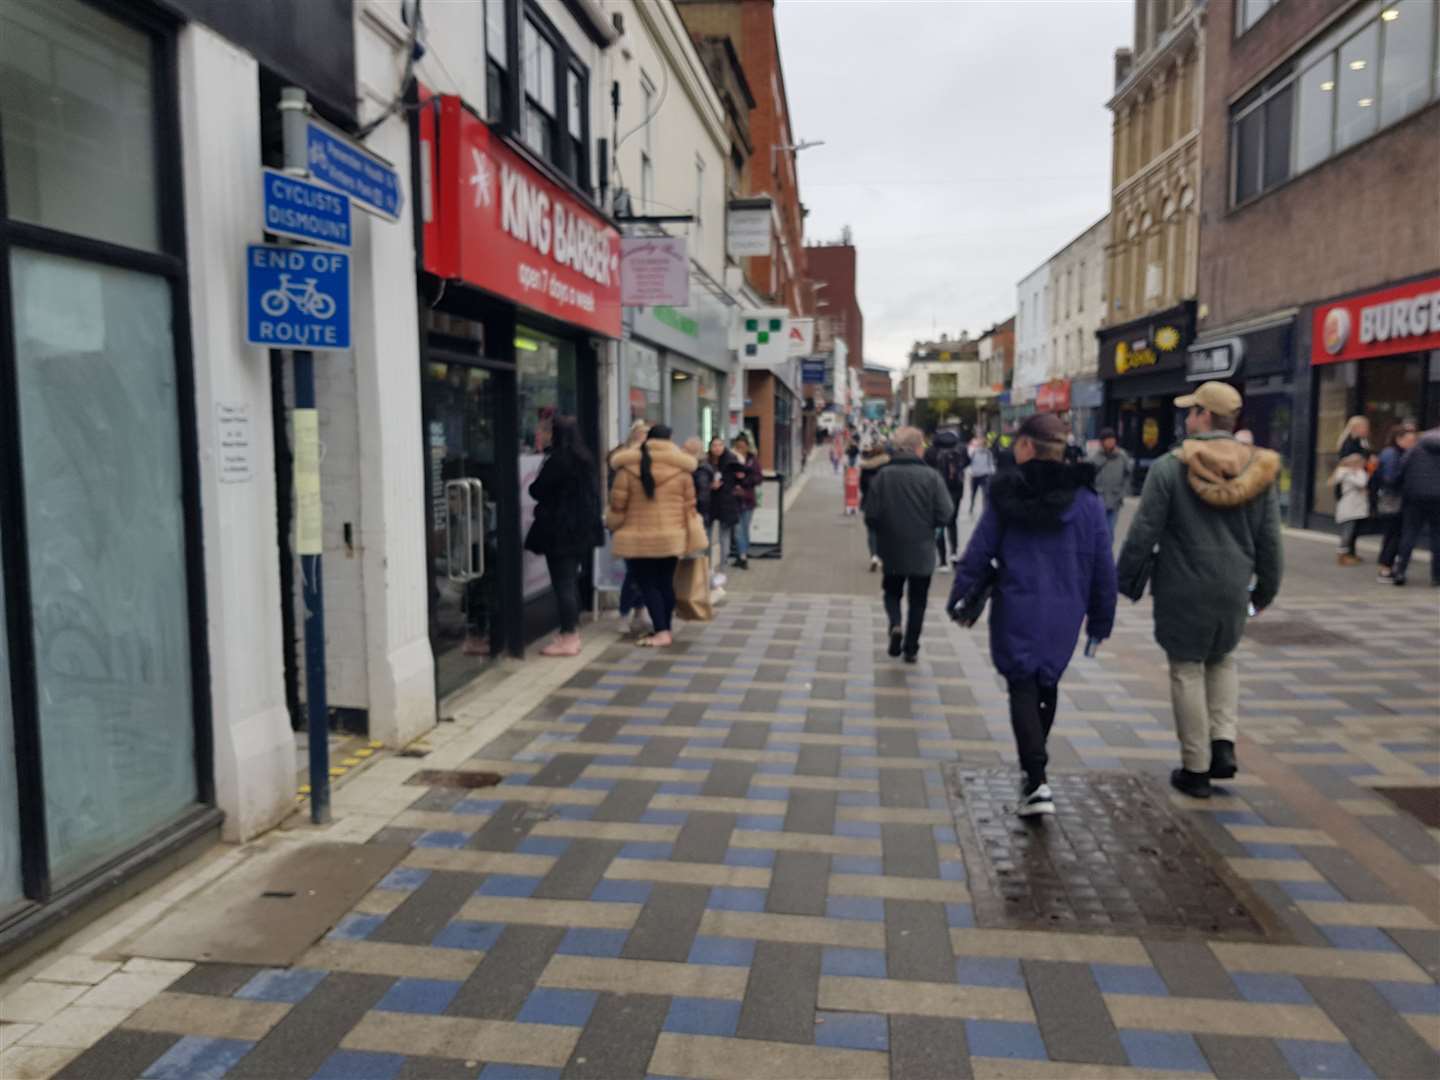 Shoppers in Maidstone on the day shops reopened after lockdown